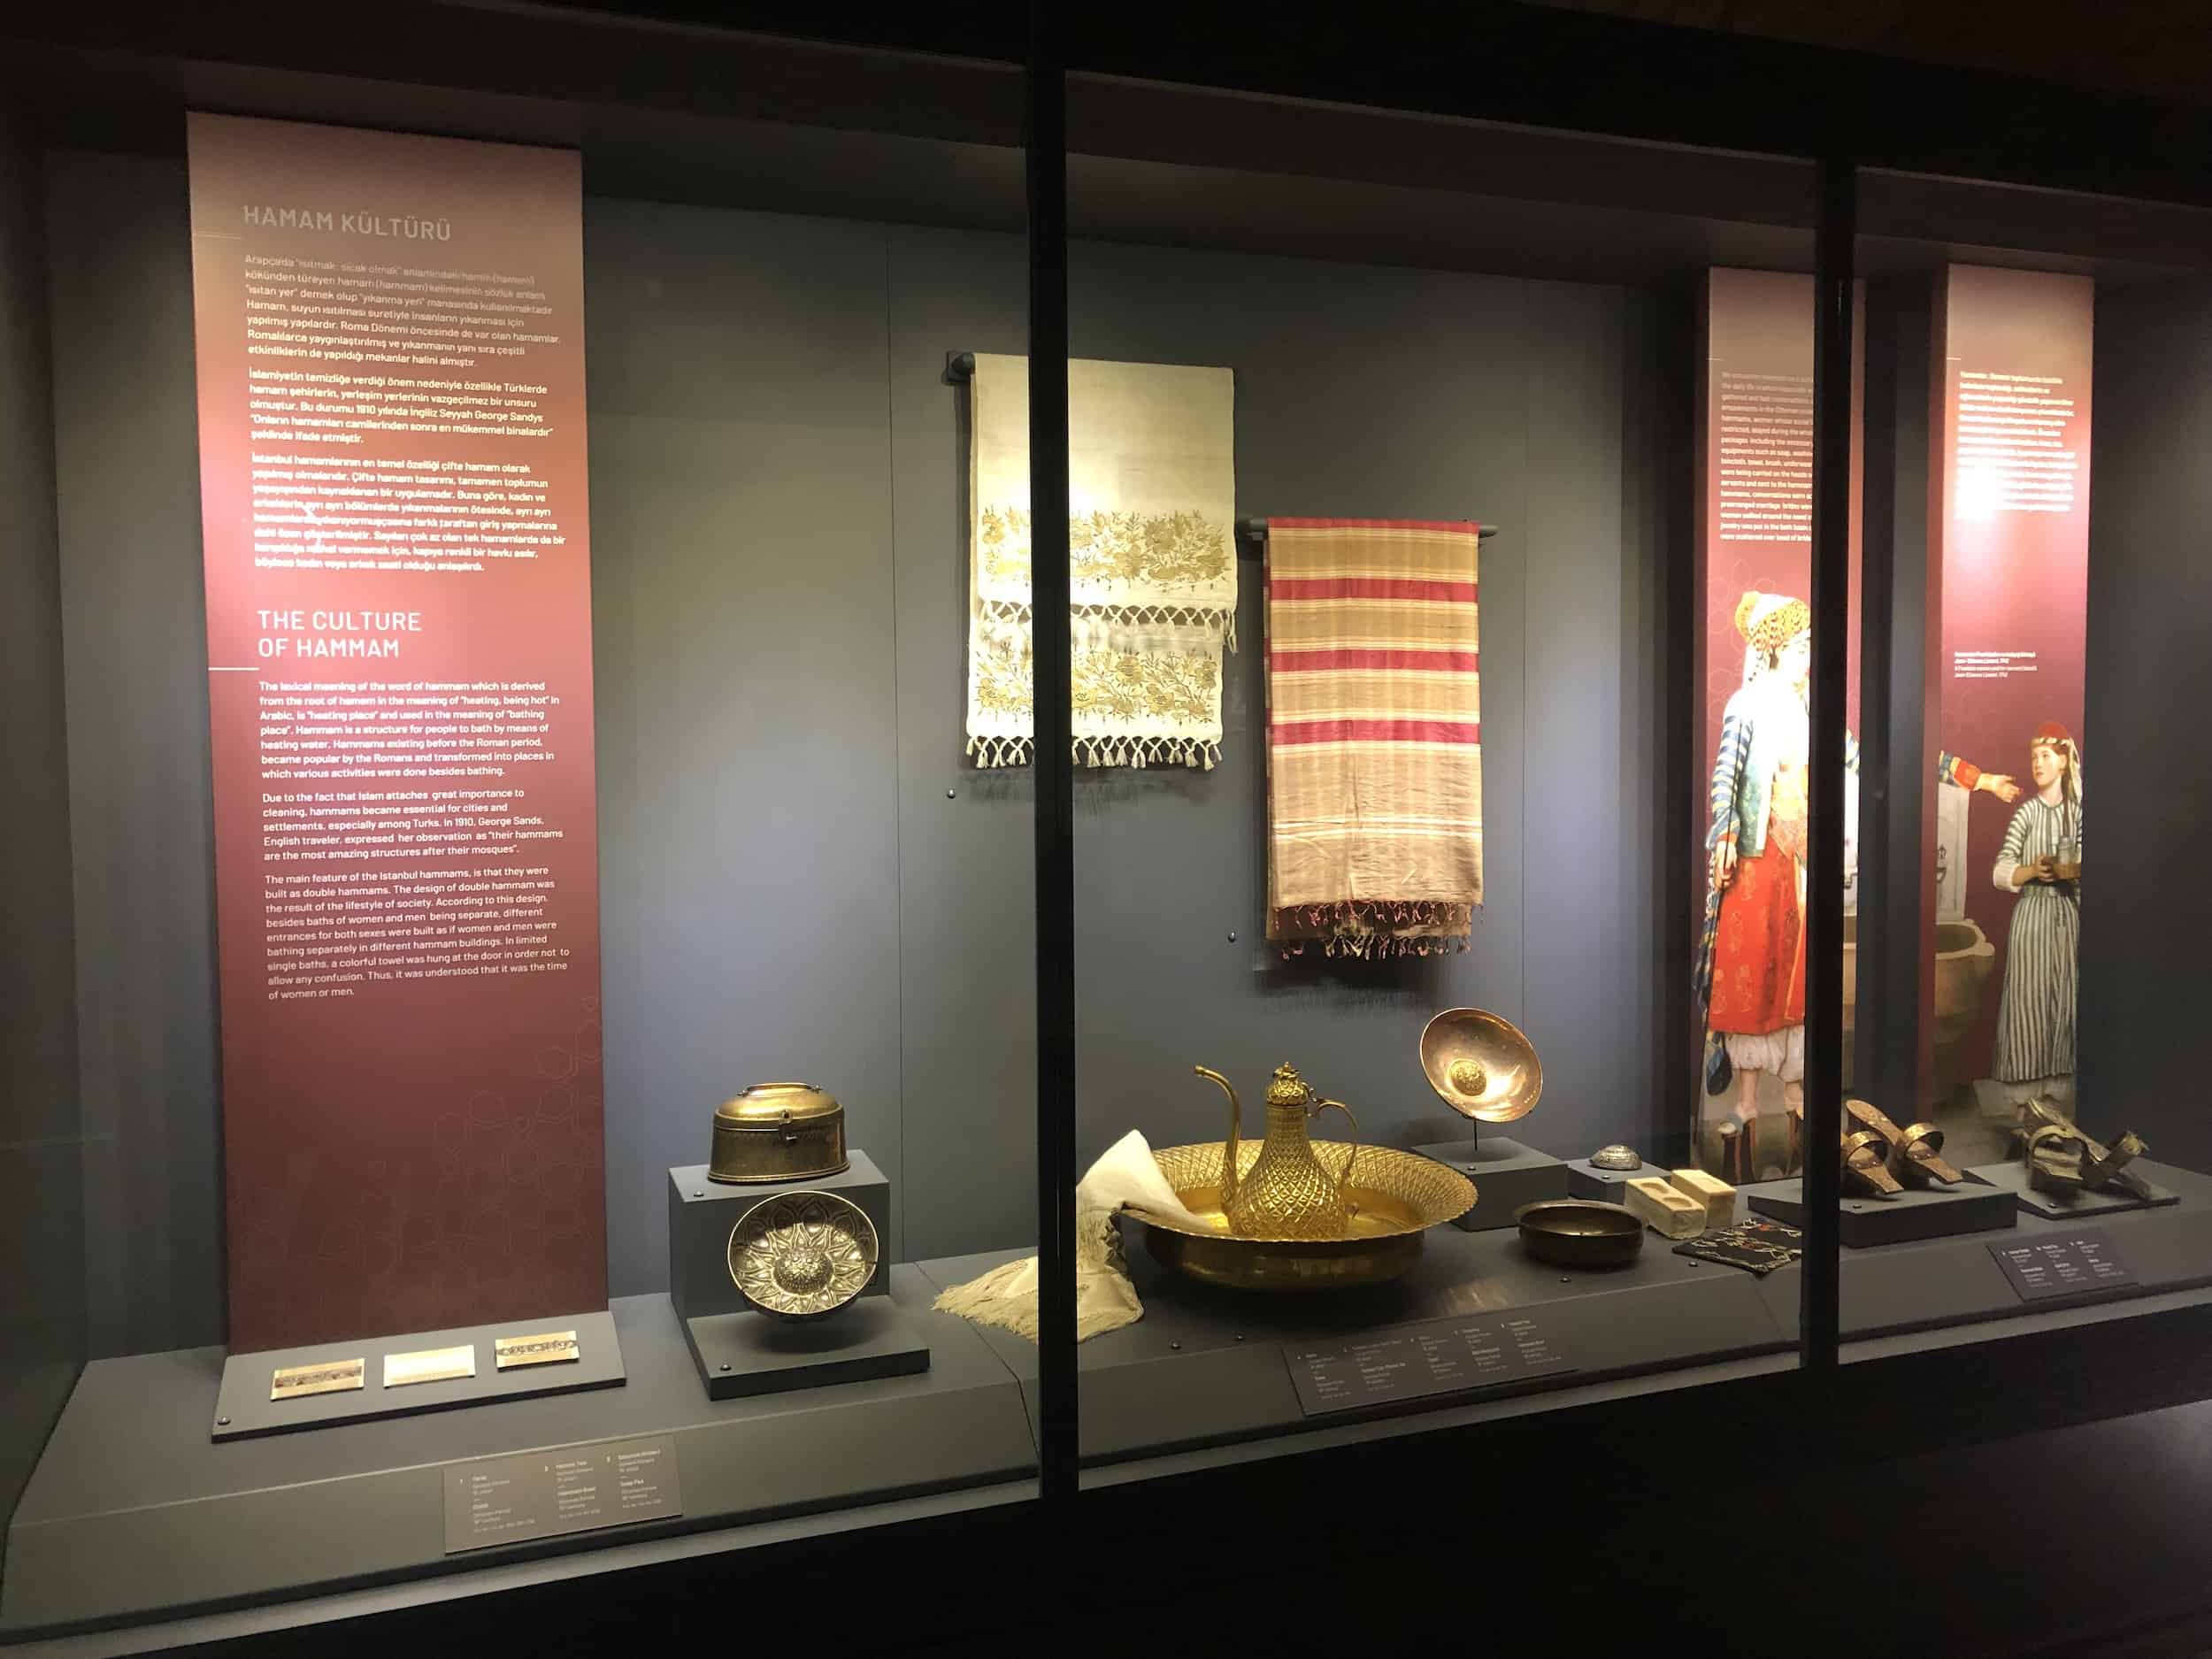 Hamam culture in the ethnographic collection at the Museum of Turkish and Islamic Arts in Istanbul, Turkey